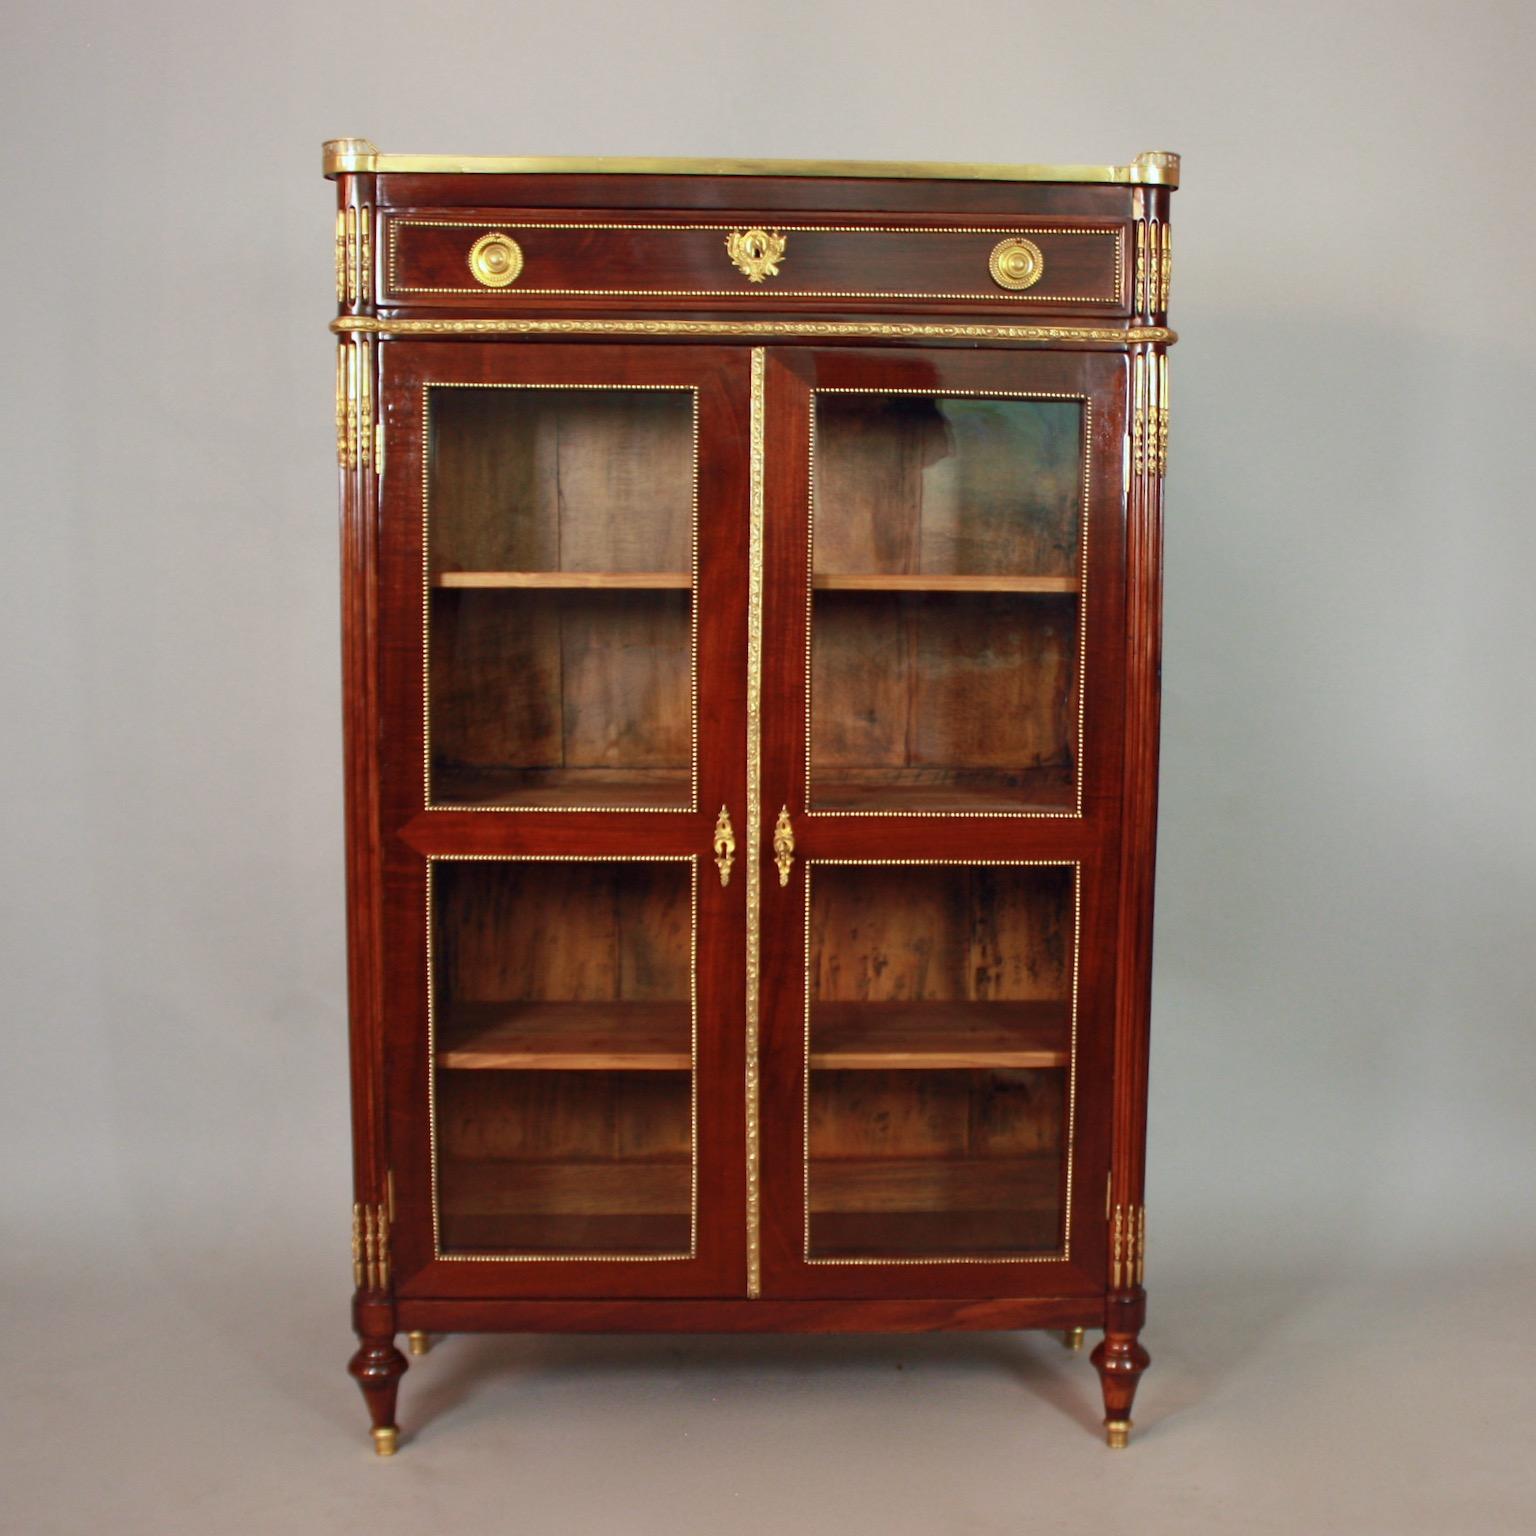 French 18th Century Louis XVI Mahogany Gilt Bronze Vitrine/Showcase or Bibliotheque

A late 18th century gilt-bronze mounted vitrine or bibliotheque of the late 18th century. The marble top with outset rounded corners enclosed by a pierced gallery